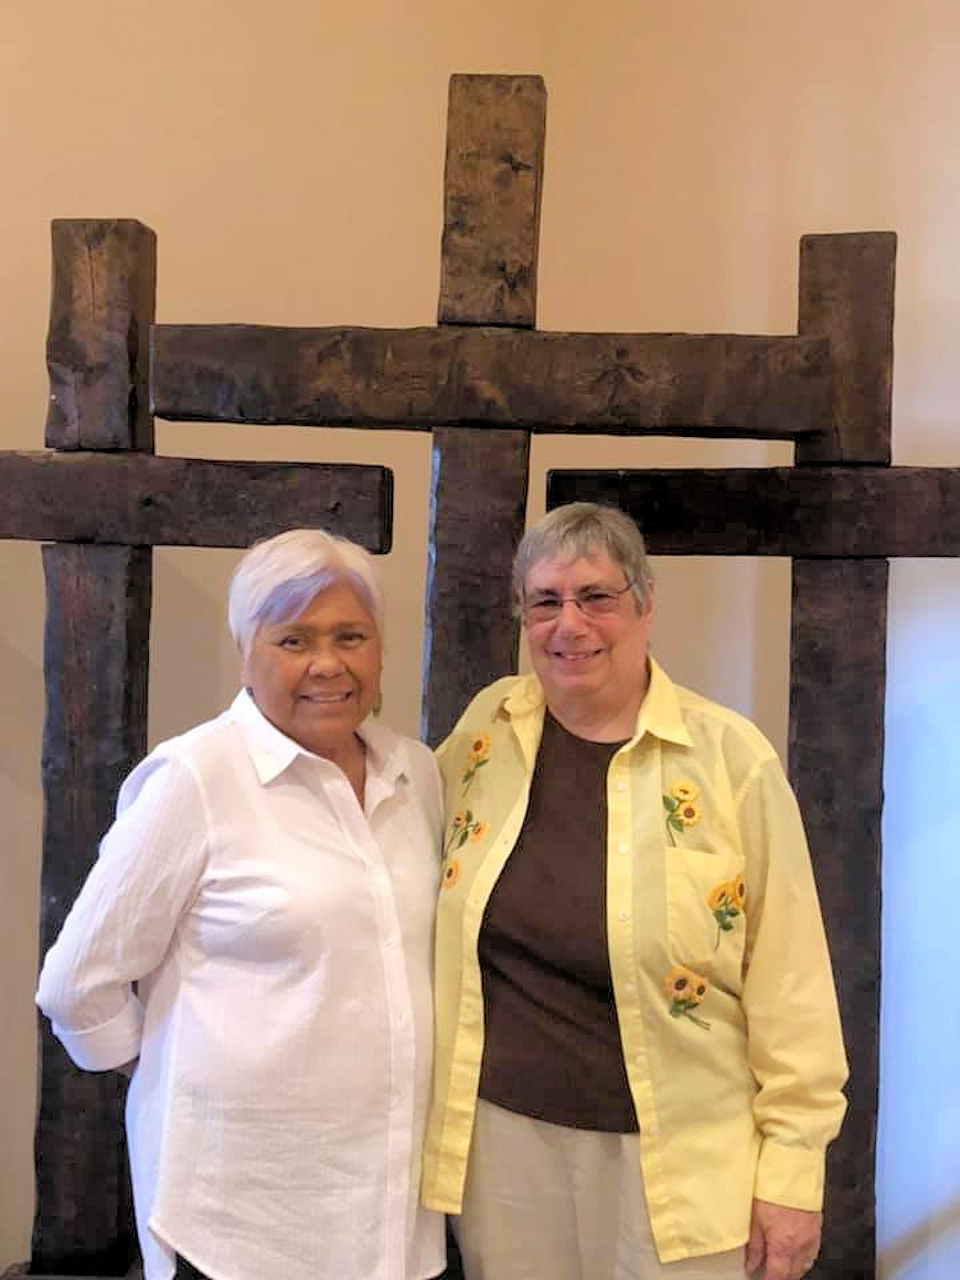 Two new rural chaplains